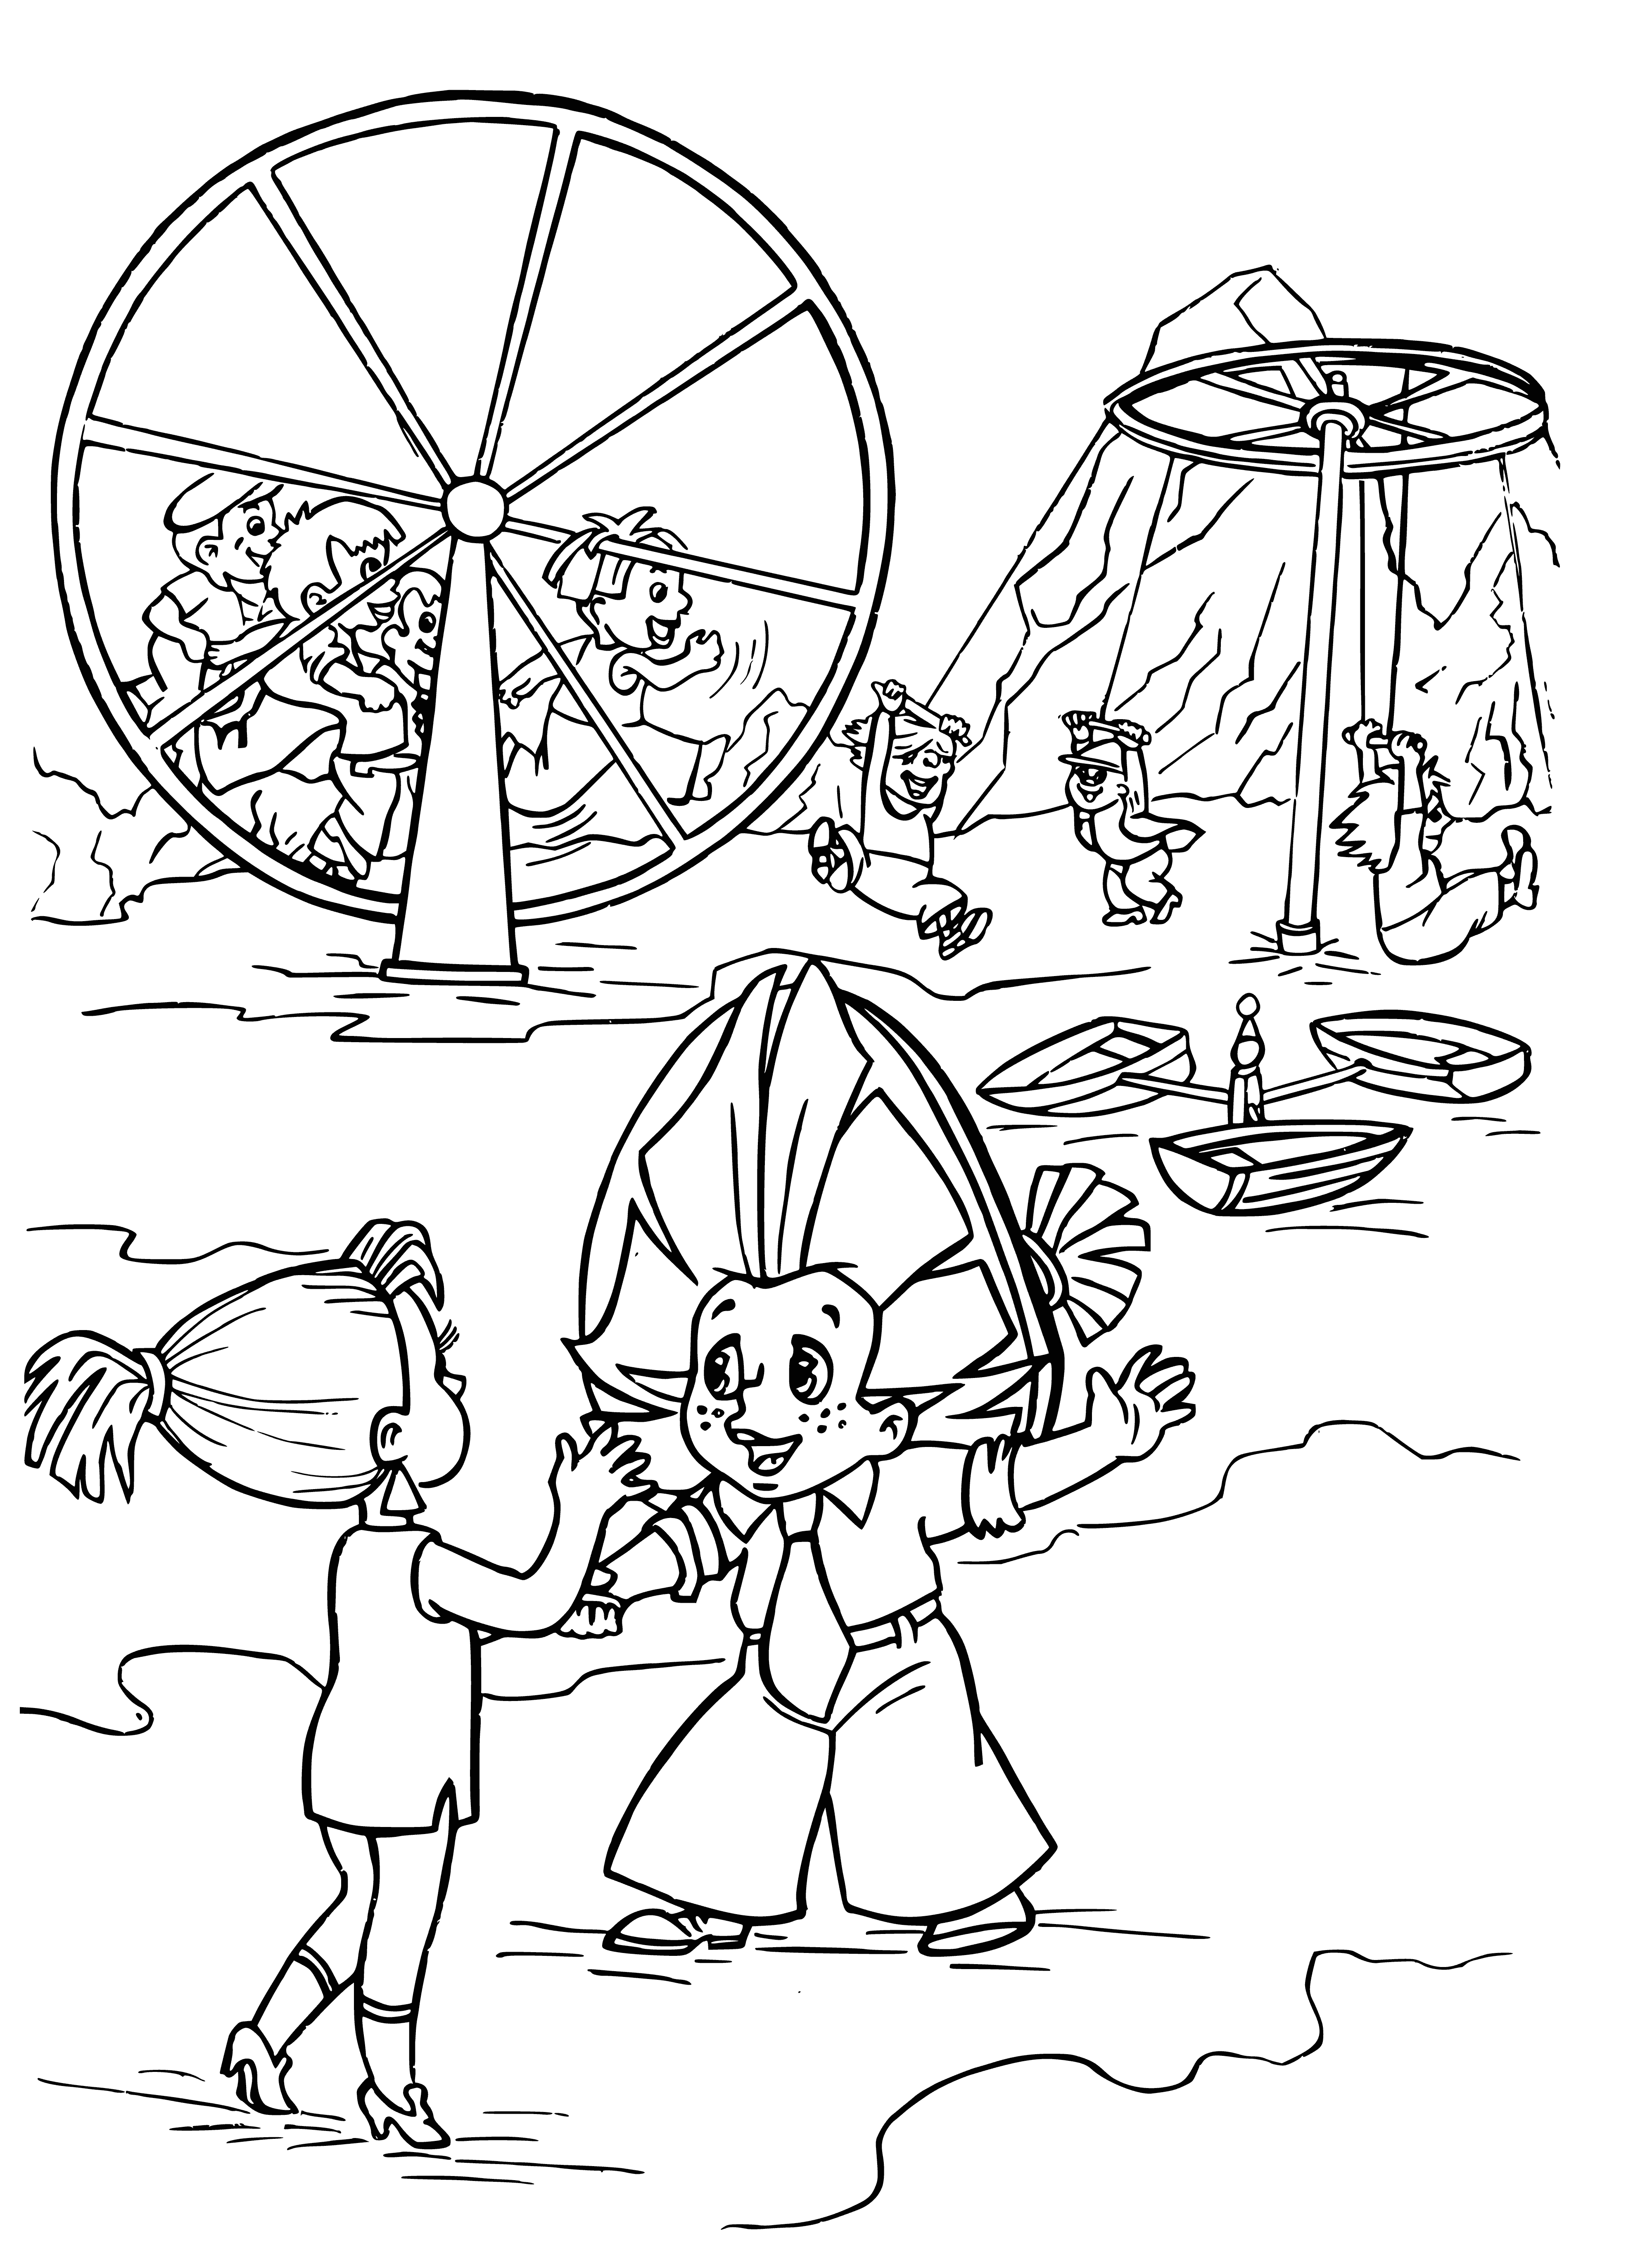 coloring page: Boy hangs from rope on tree limb in moonlight; carousel, swing set in background.